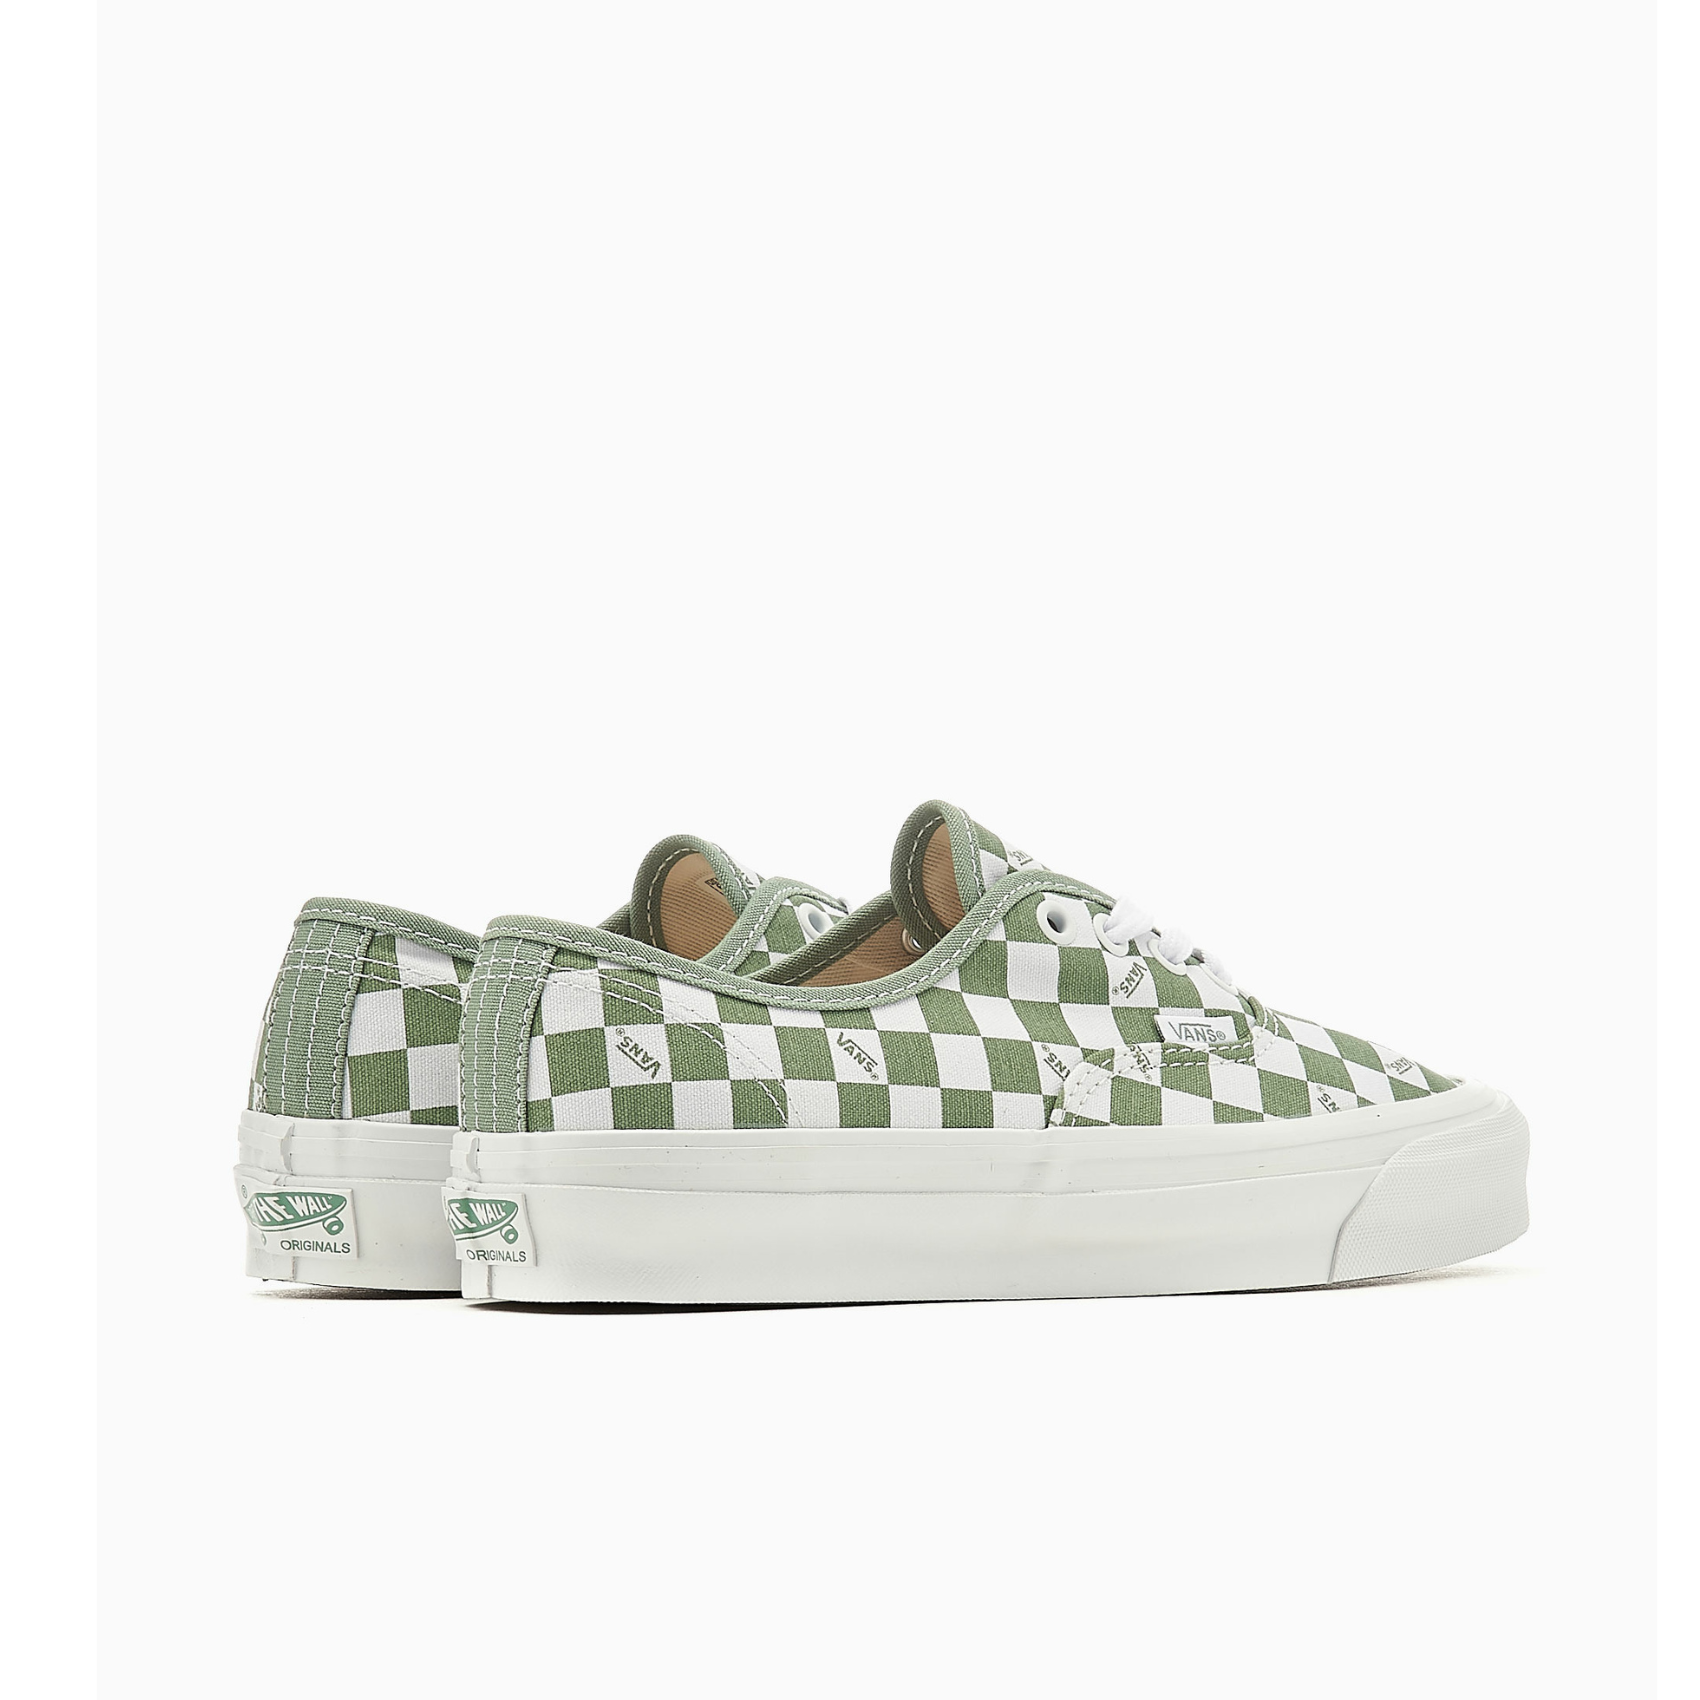 Og Authentic L Vault - Checkerboard Loden